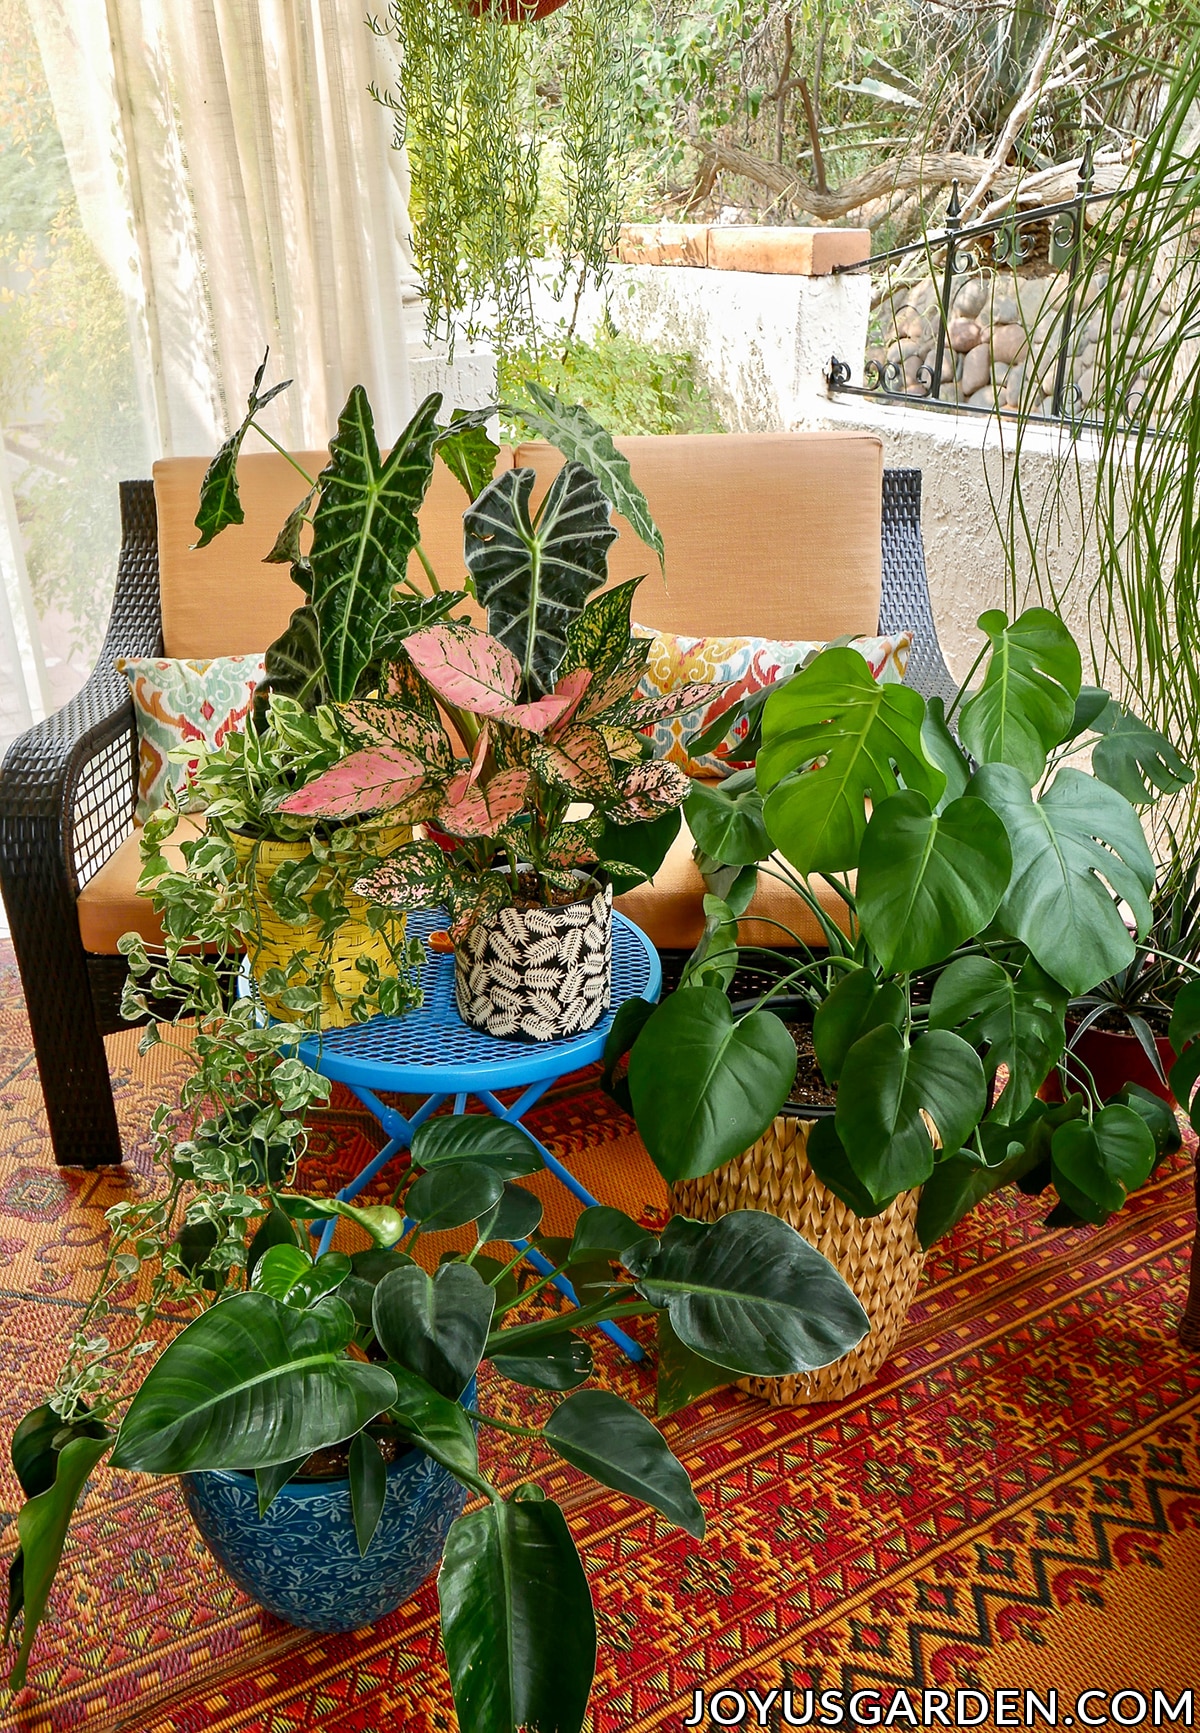 An african mask plant pothos enjoy pink aglaonema philodendron congo & monstera deliciosa are arranged on a patio.